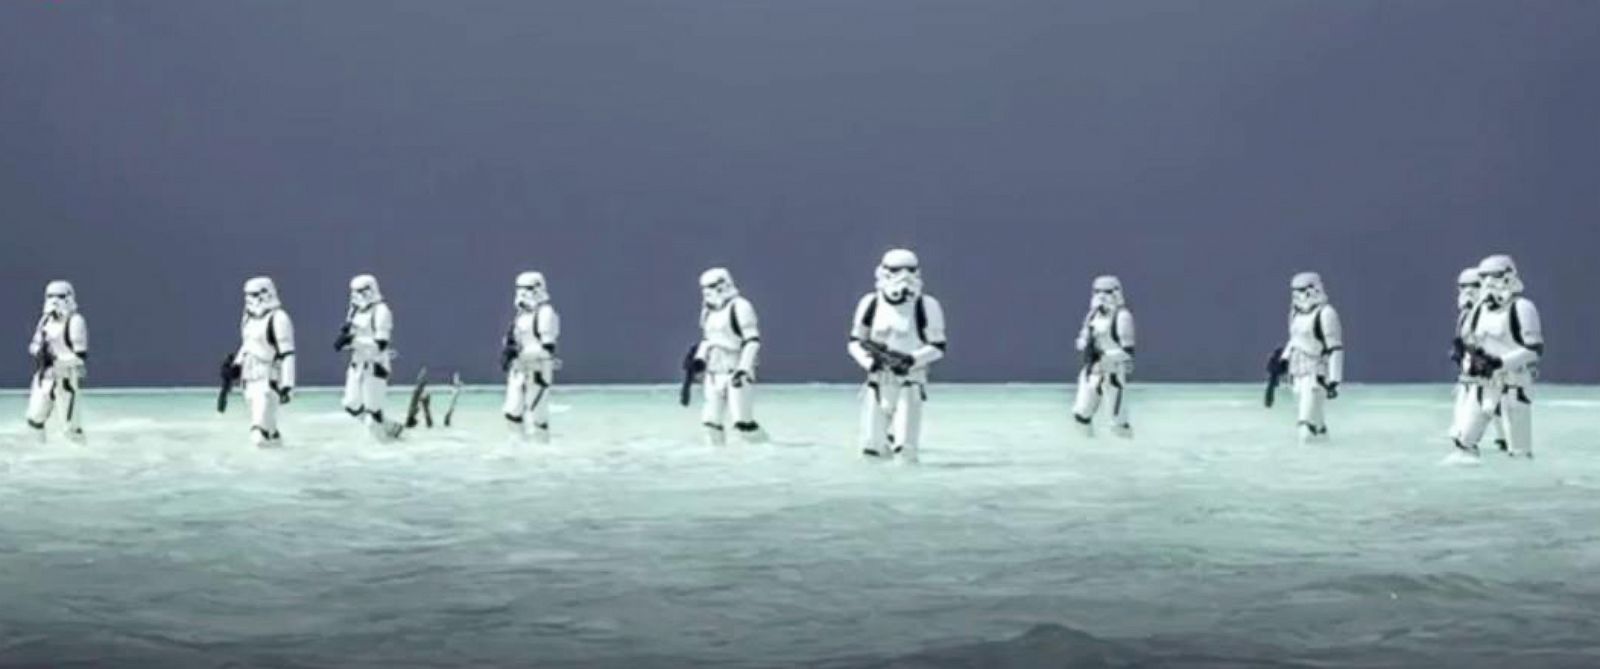 Watch Movie Rogue One: A Star Wars Story 2016 Online